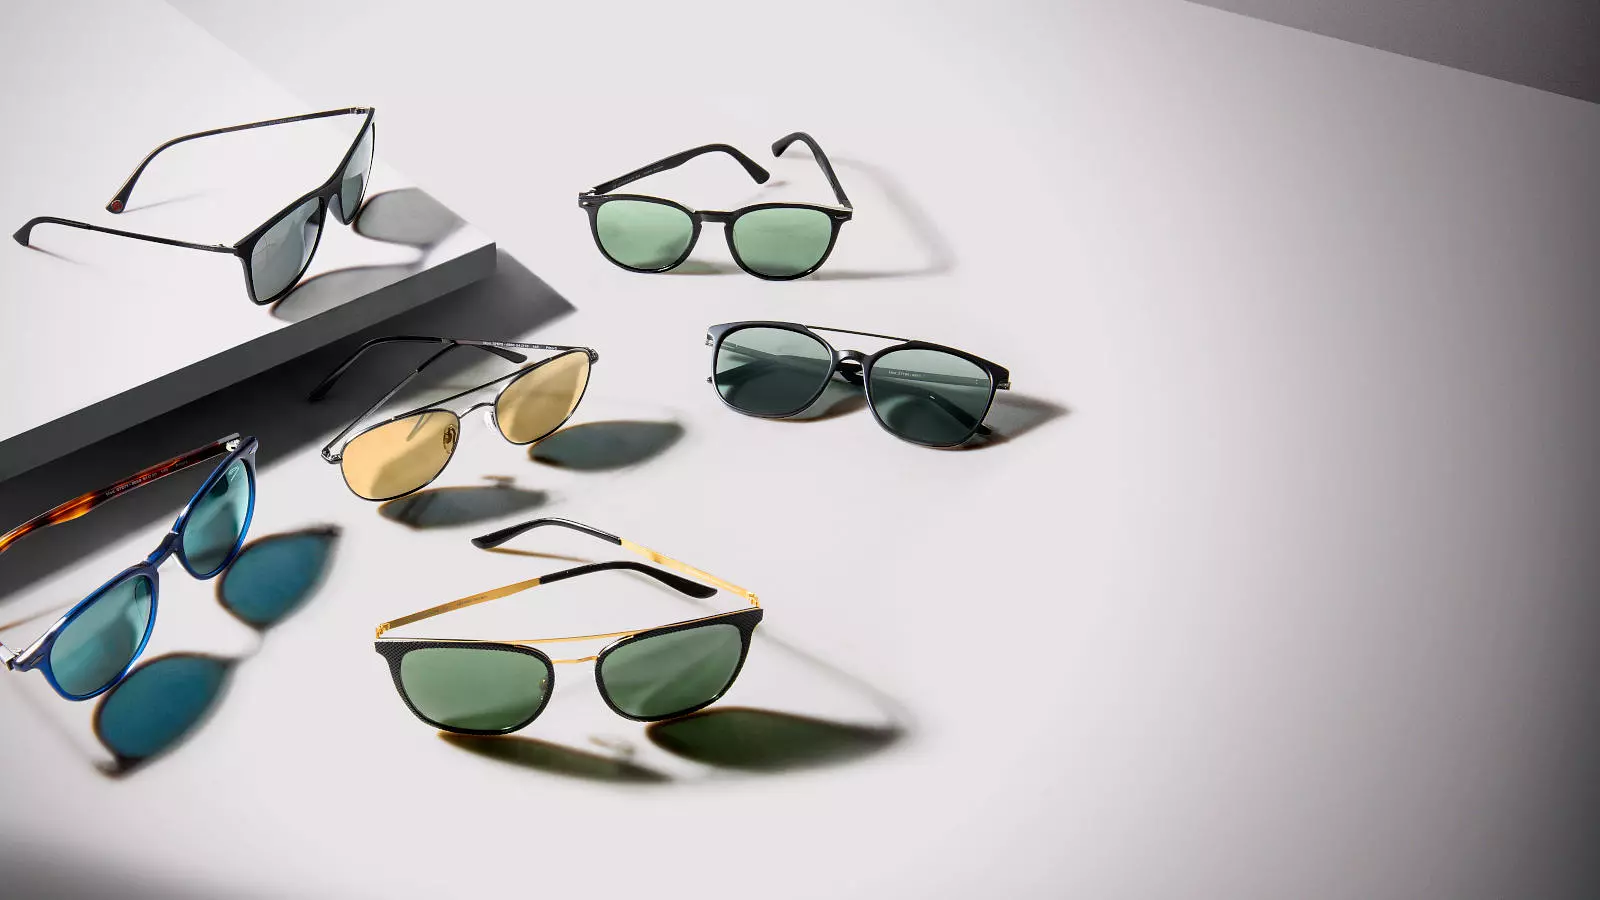 THE LIFESTYLE COLLECTION - SUNGLASSES